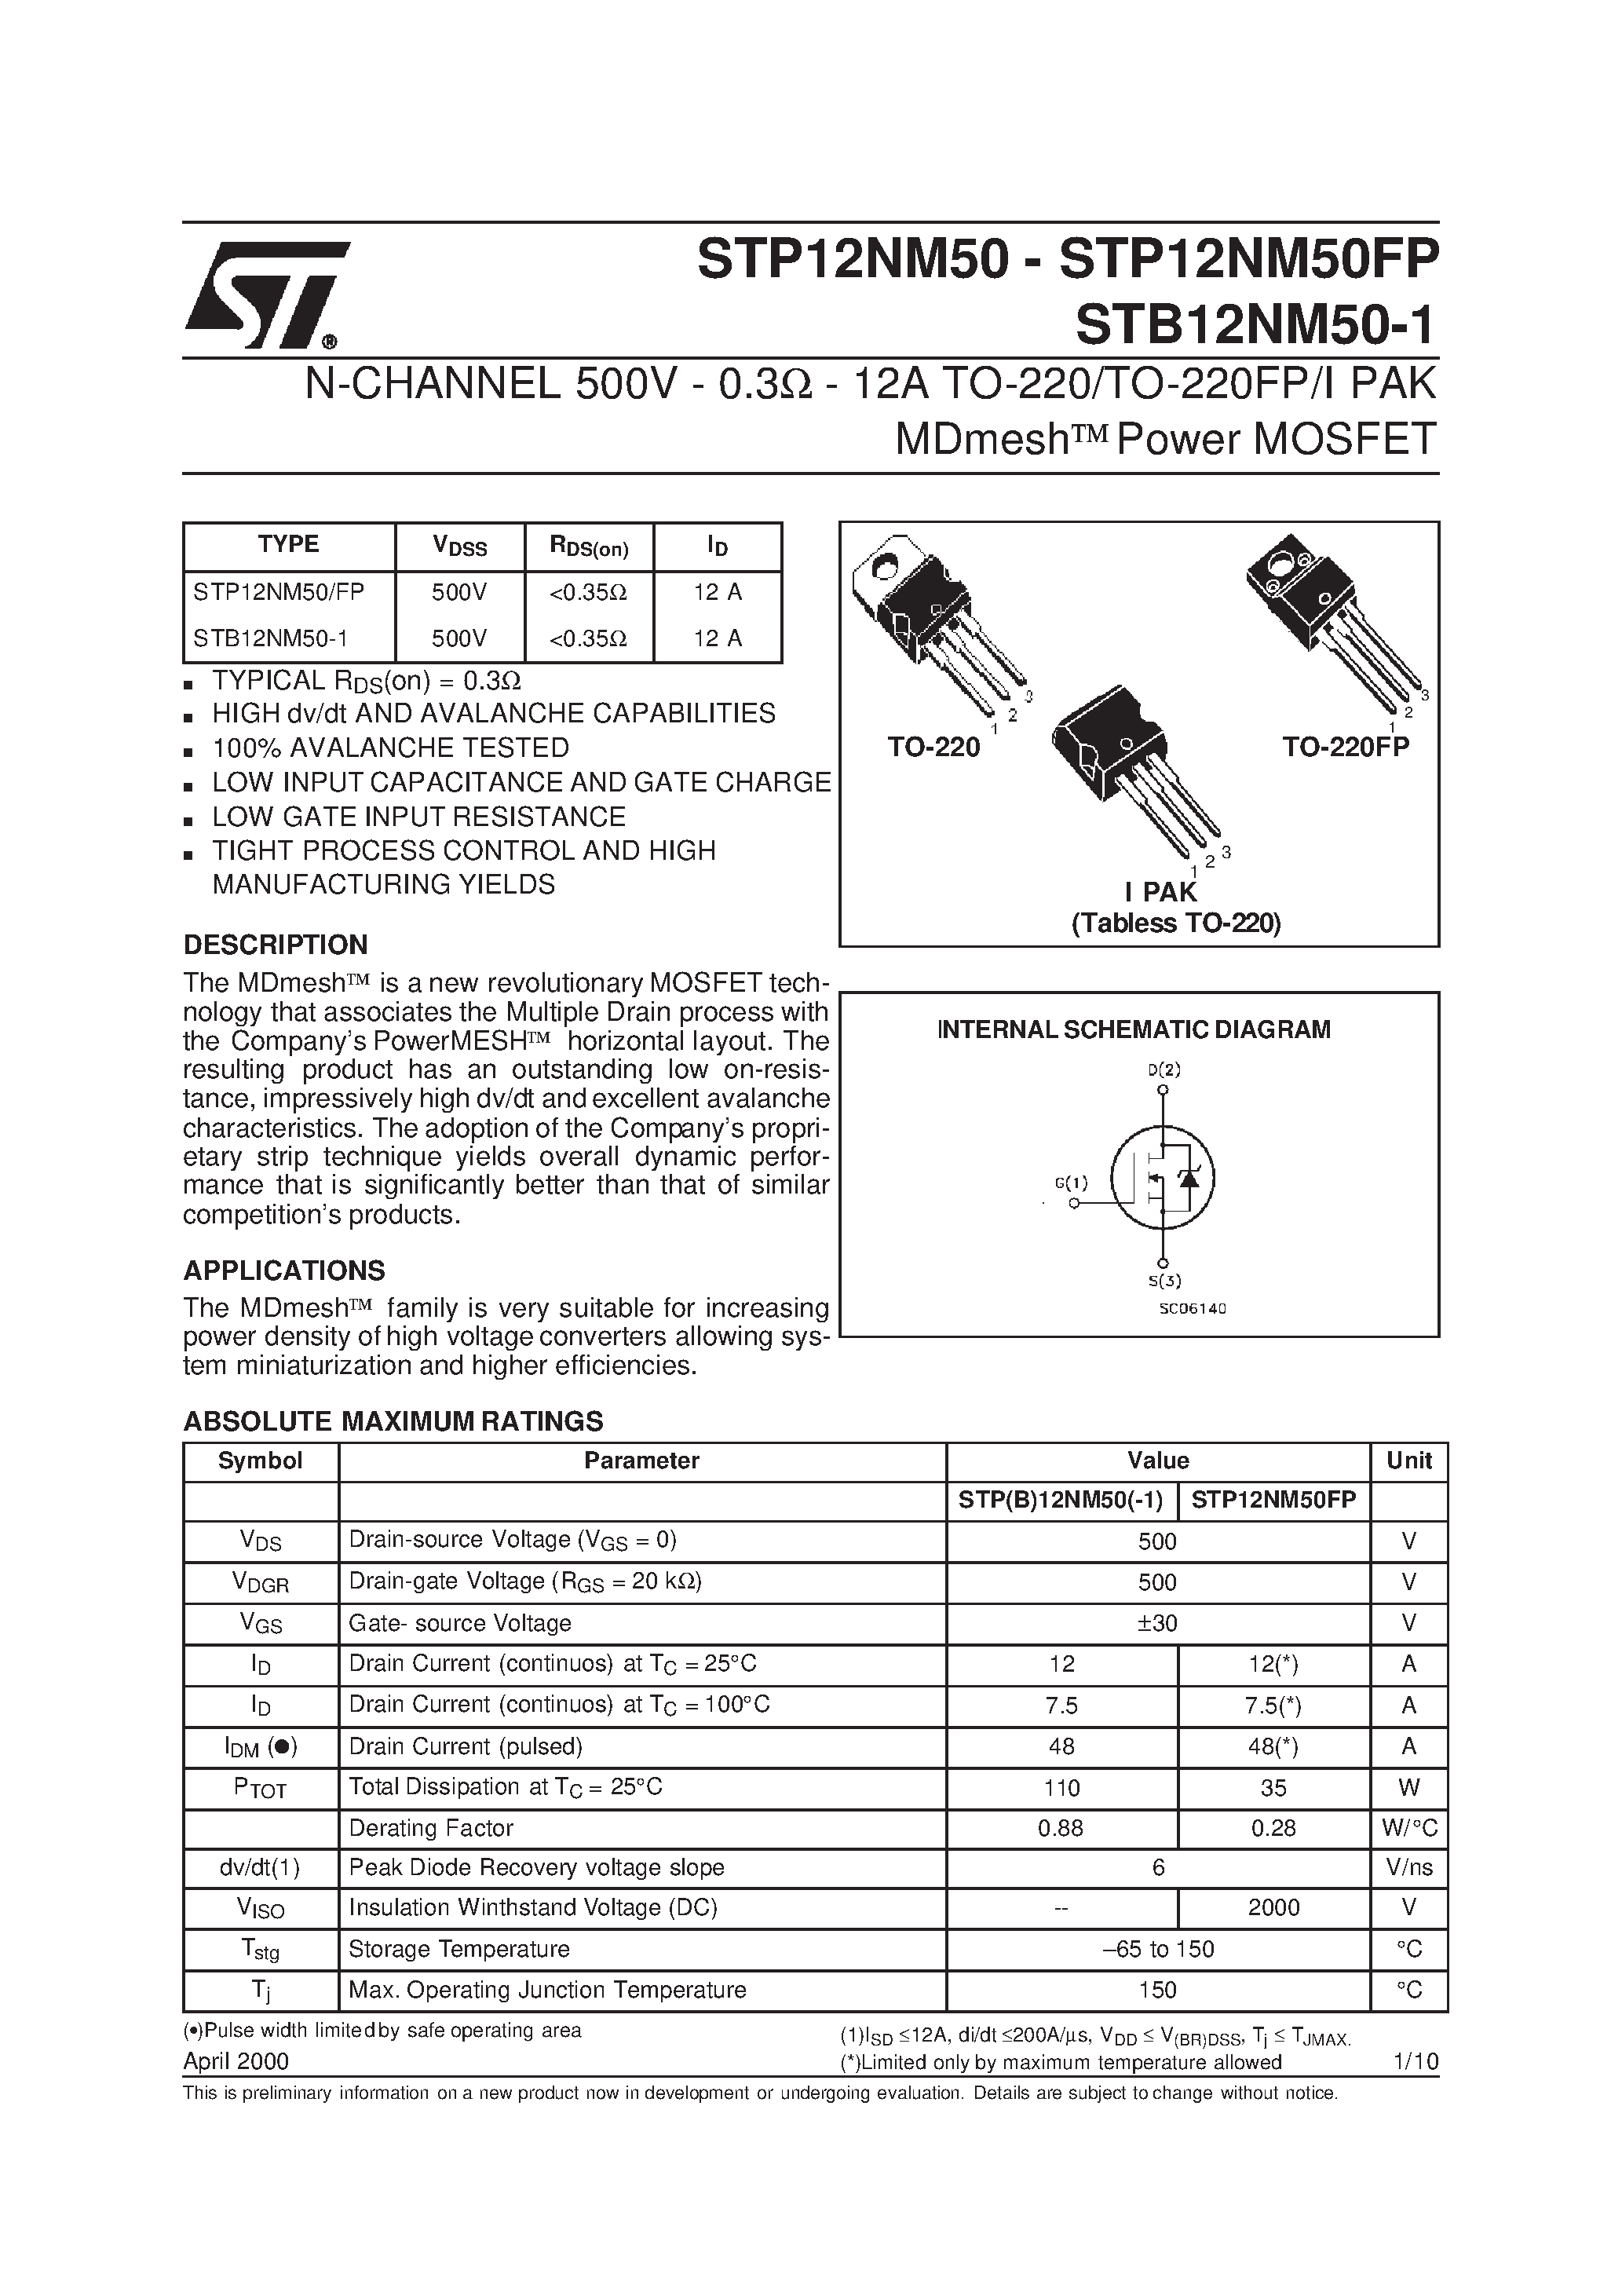 Datasheet STP12NM50 - N-CHANNEL 500V - 0.3W - 12A TO-220/TO-220FP/I PAK MDmesh Power MOSFET page 1